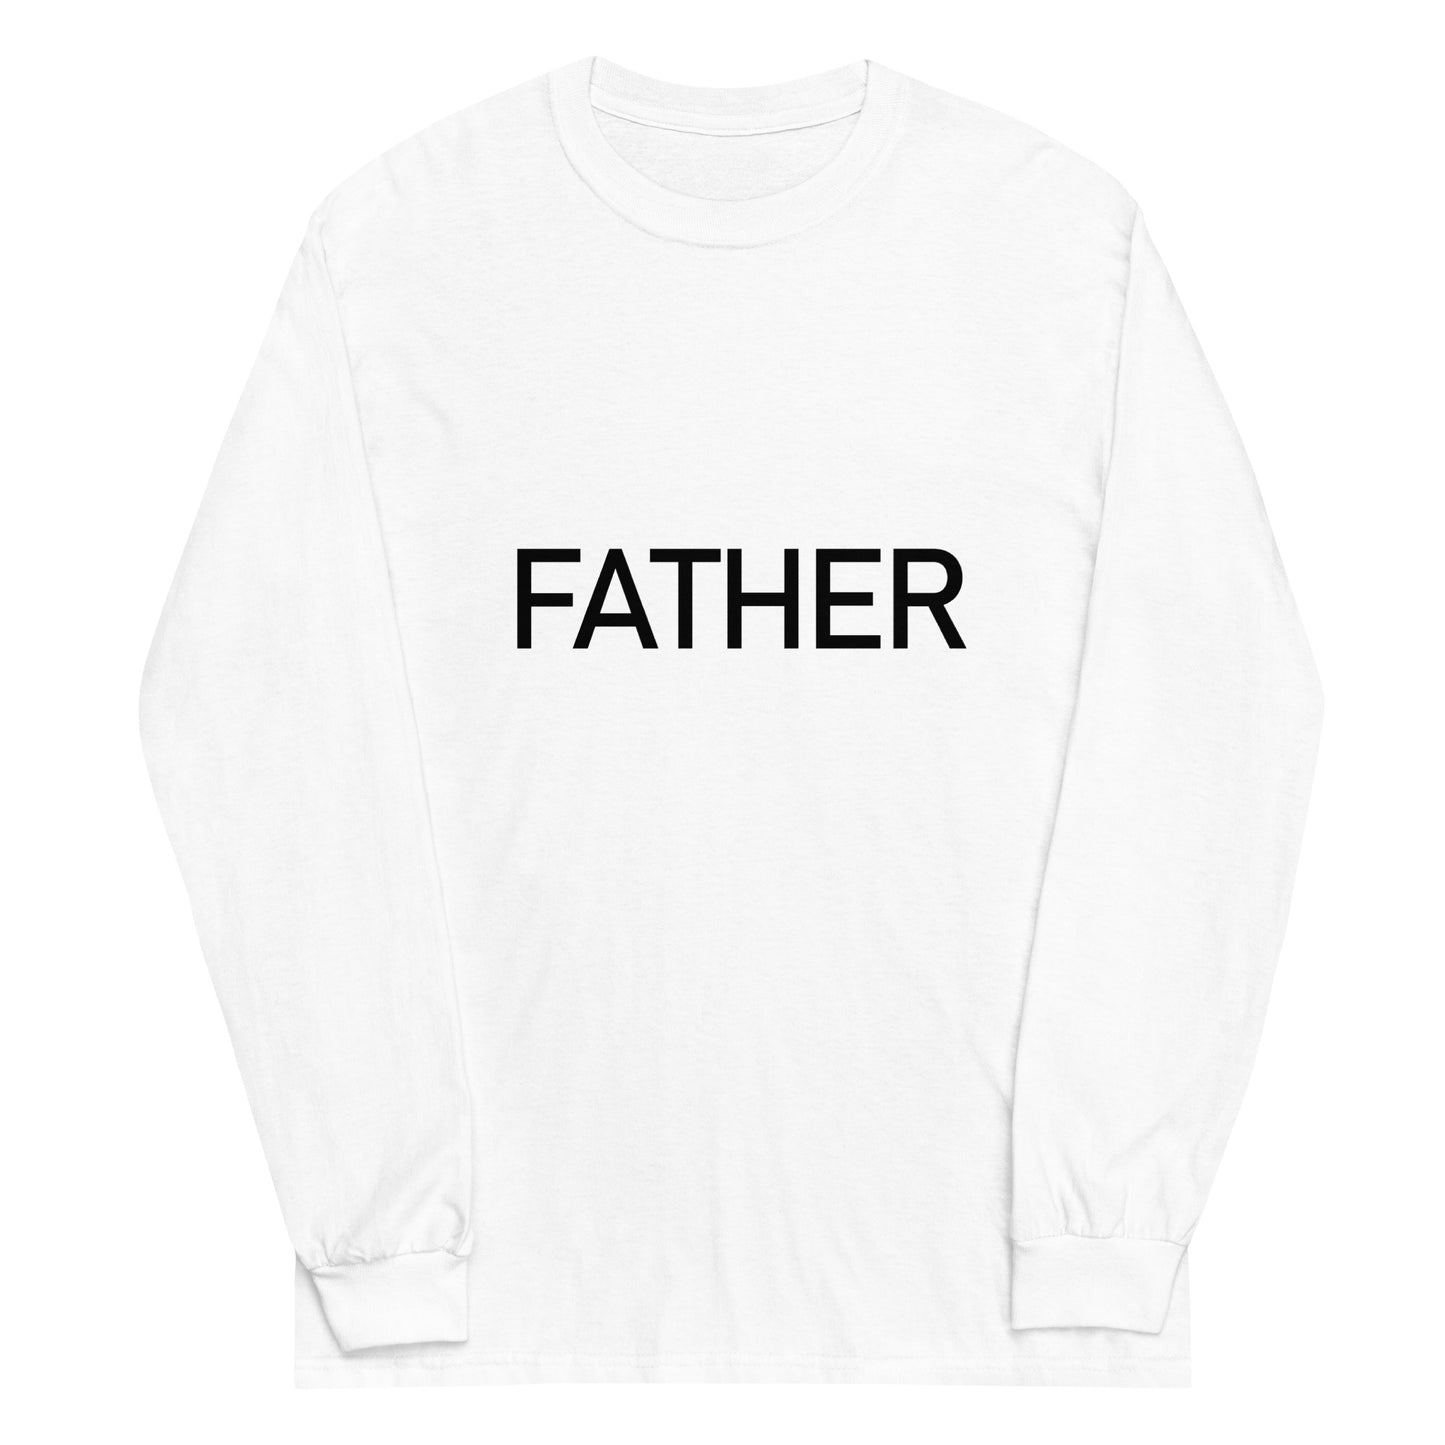 Father - Sustainably Made Long Sleeve Tee